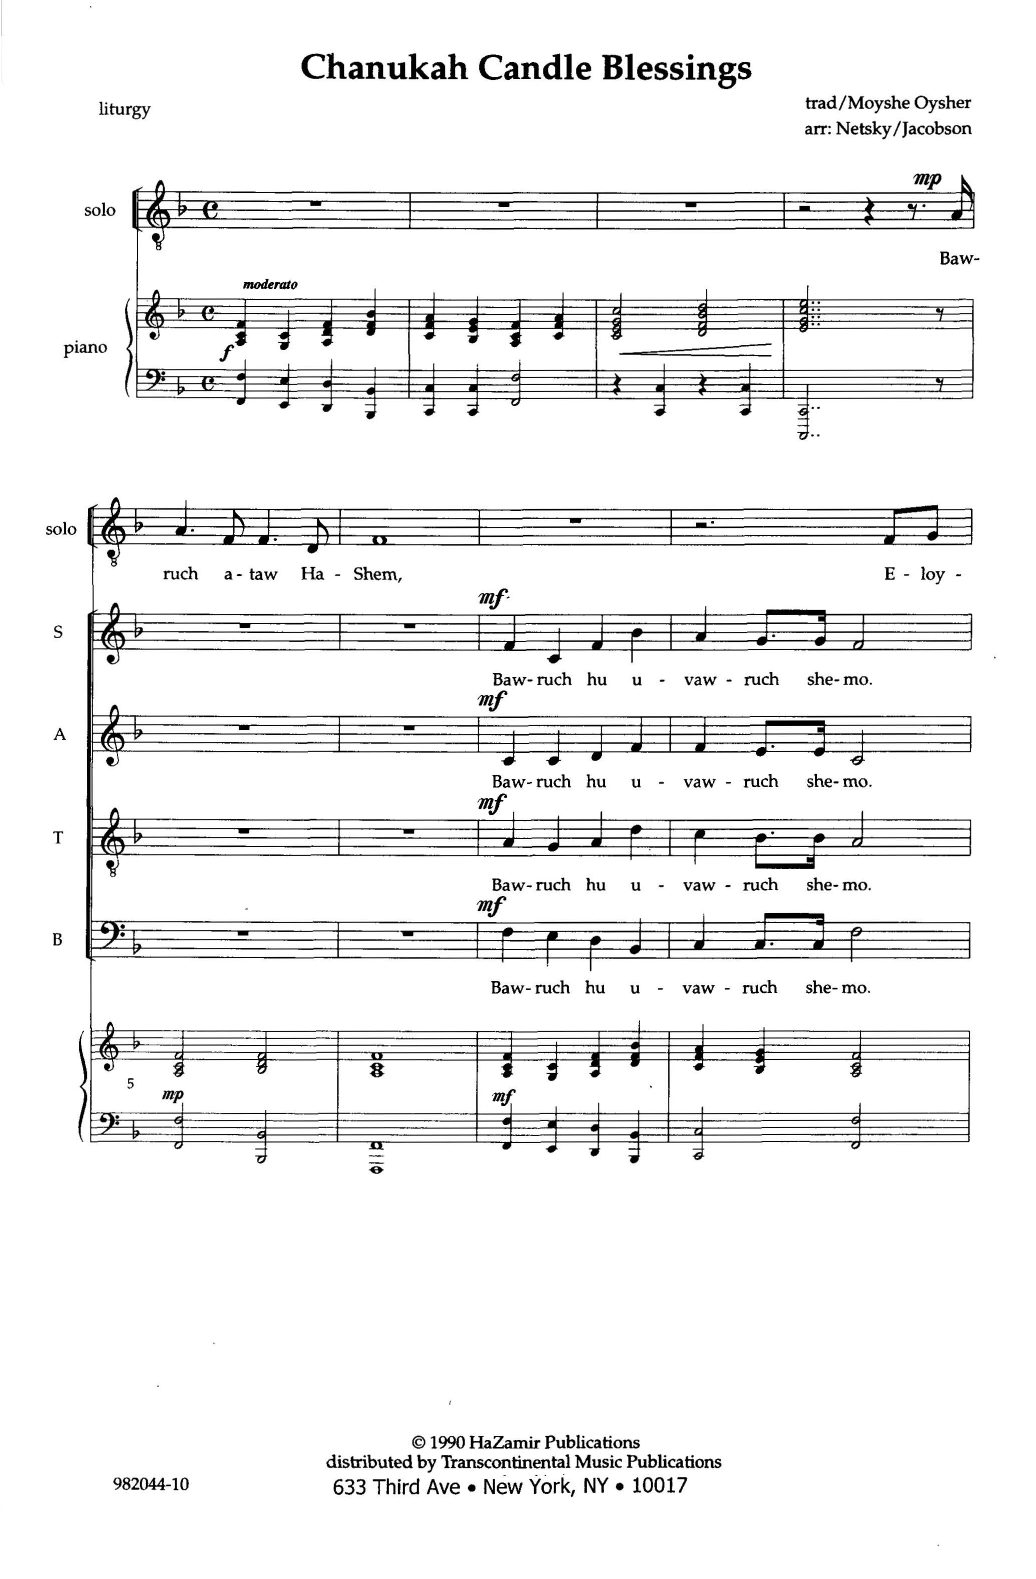 Download Joshua Jacobson Candle Blessings For Chanukah Sheet Music